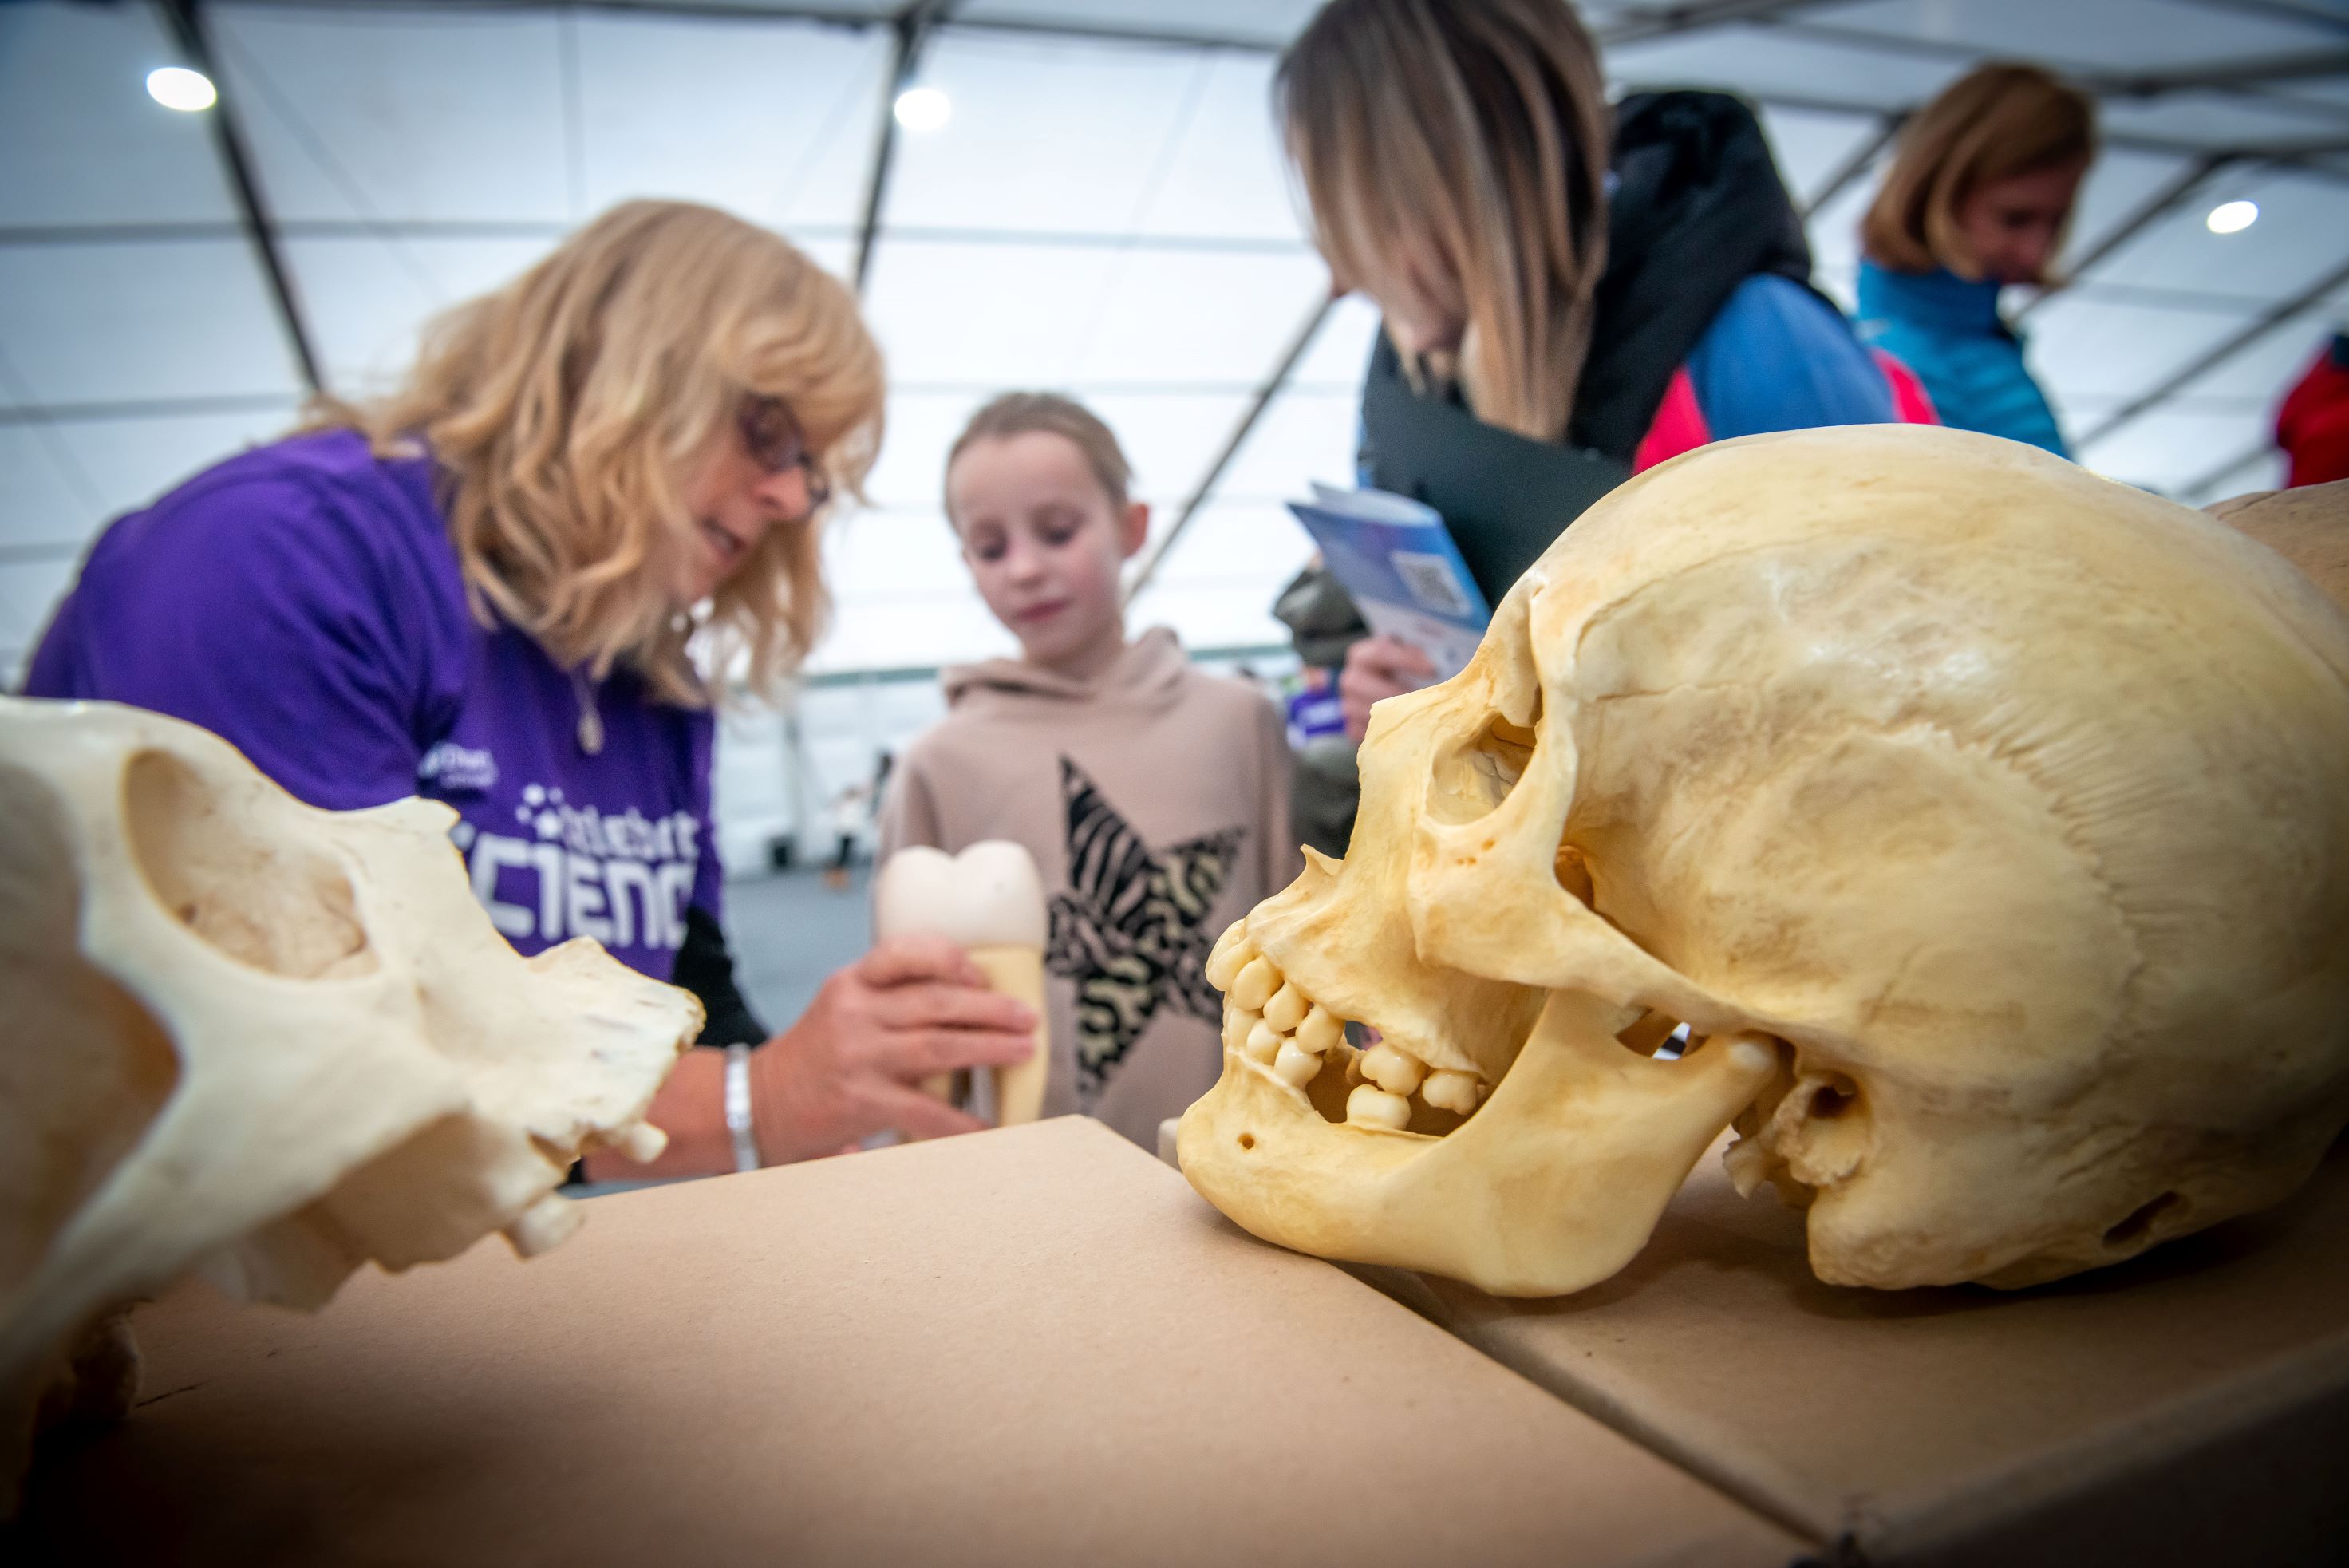 A volunteer in a purple shirt shows a model of a tooth to a child and parent. In the foreground is a plastic cast of a human skull. A vignette is applied to the image.